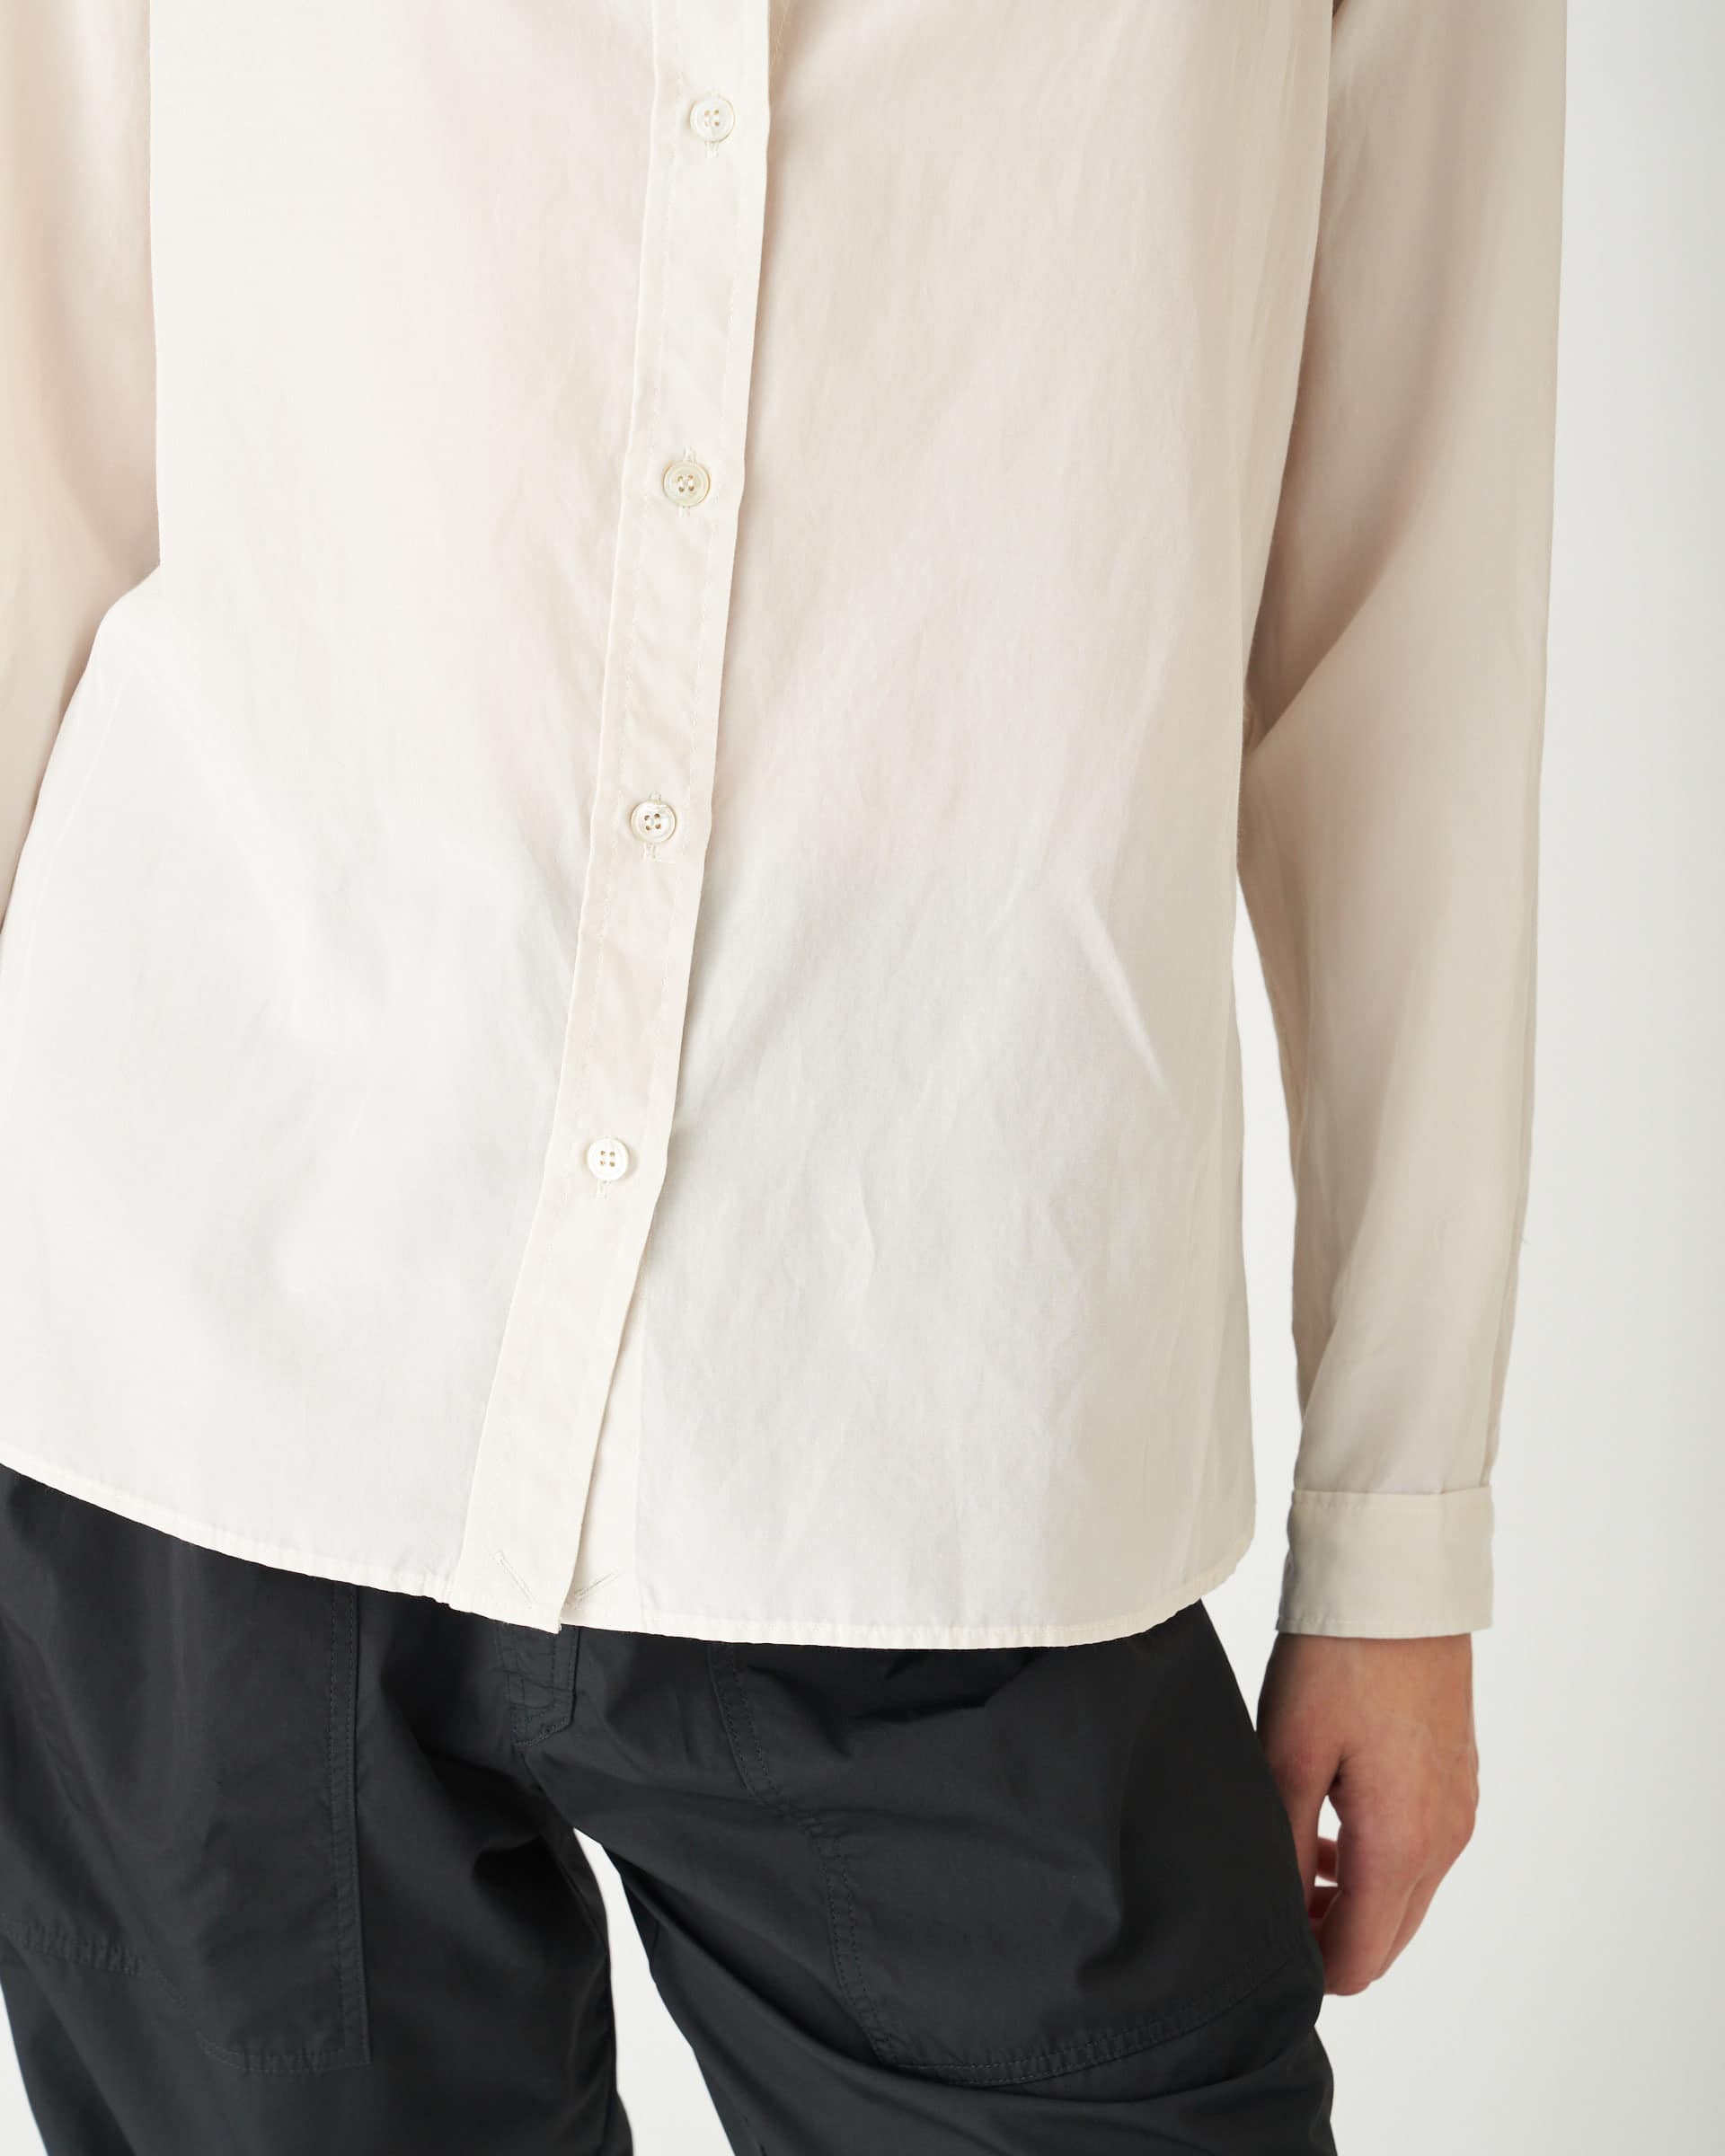 The Market Store | Silk Cotton Soled Shirt